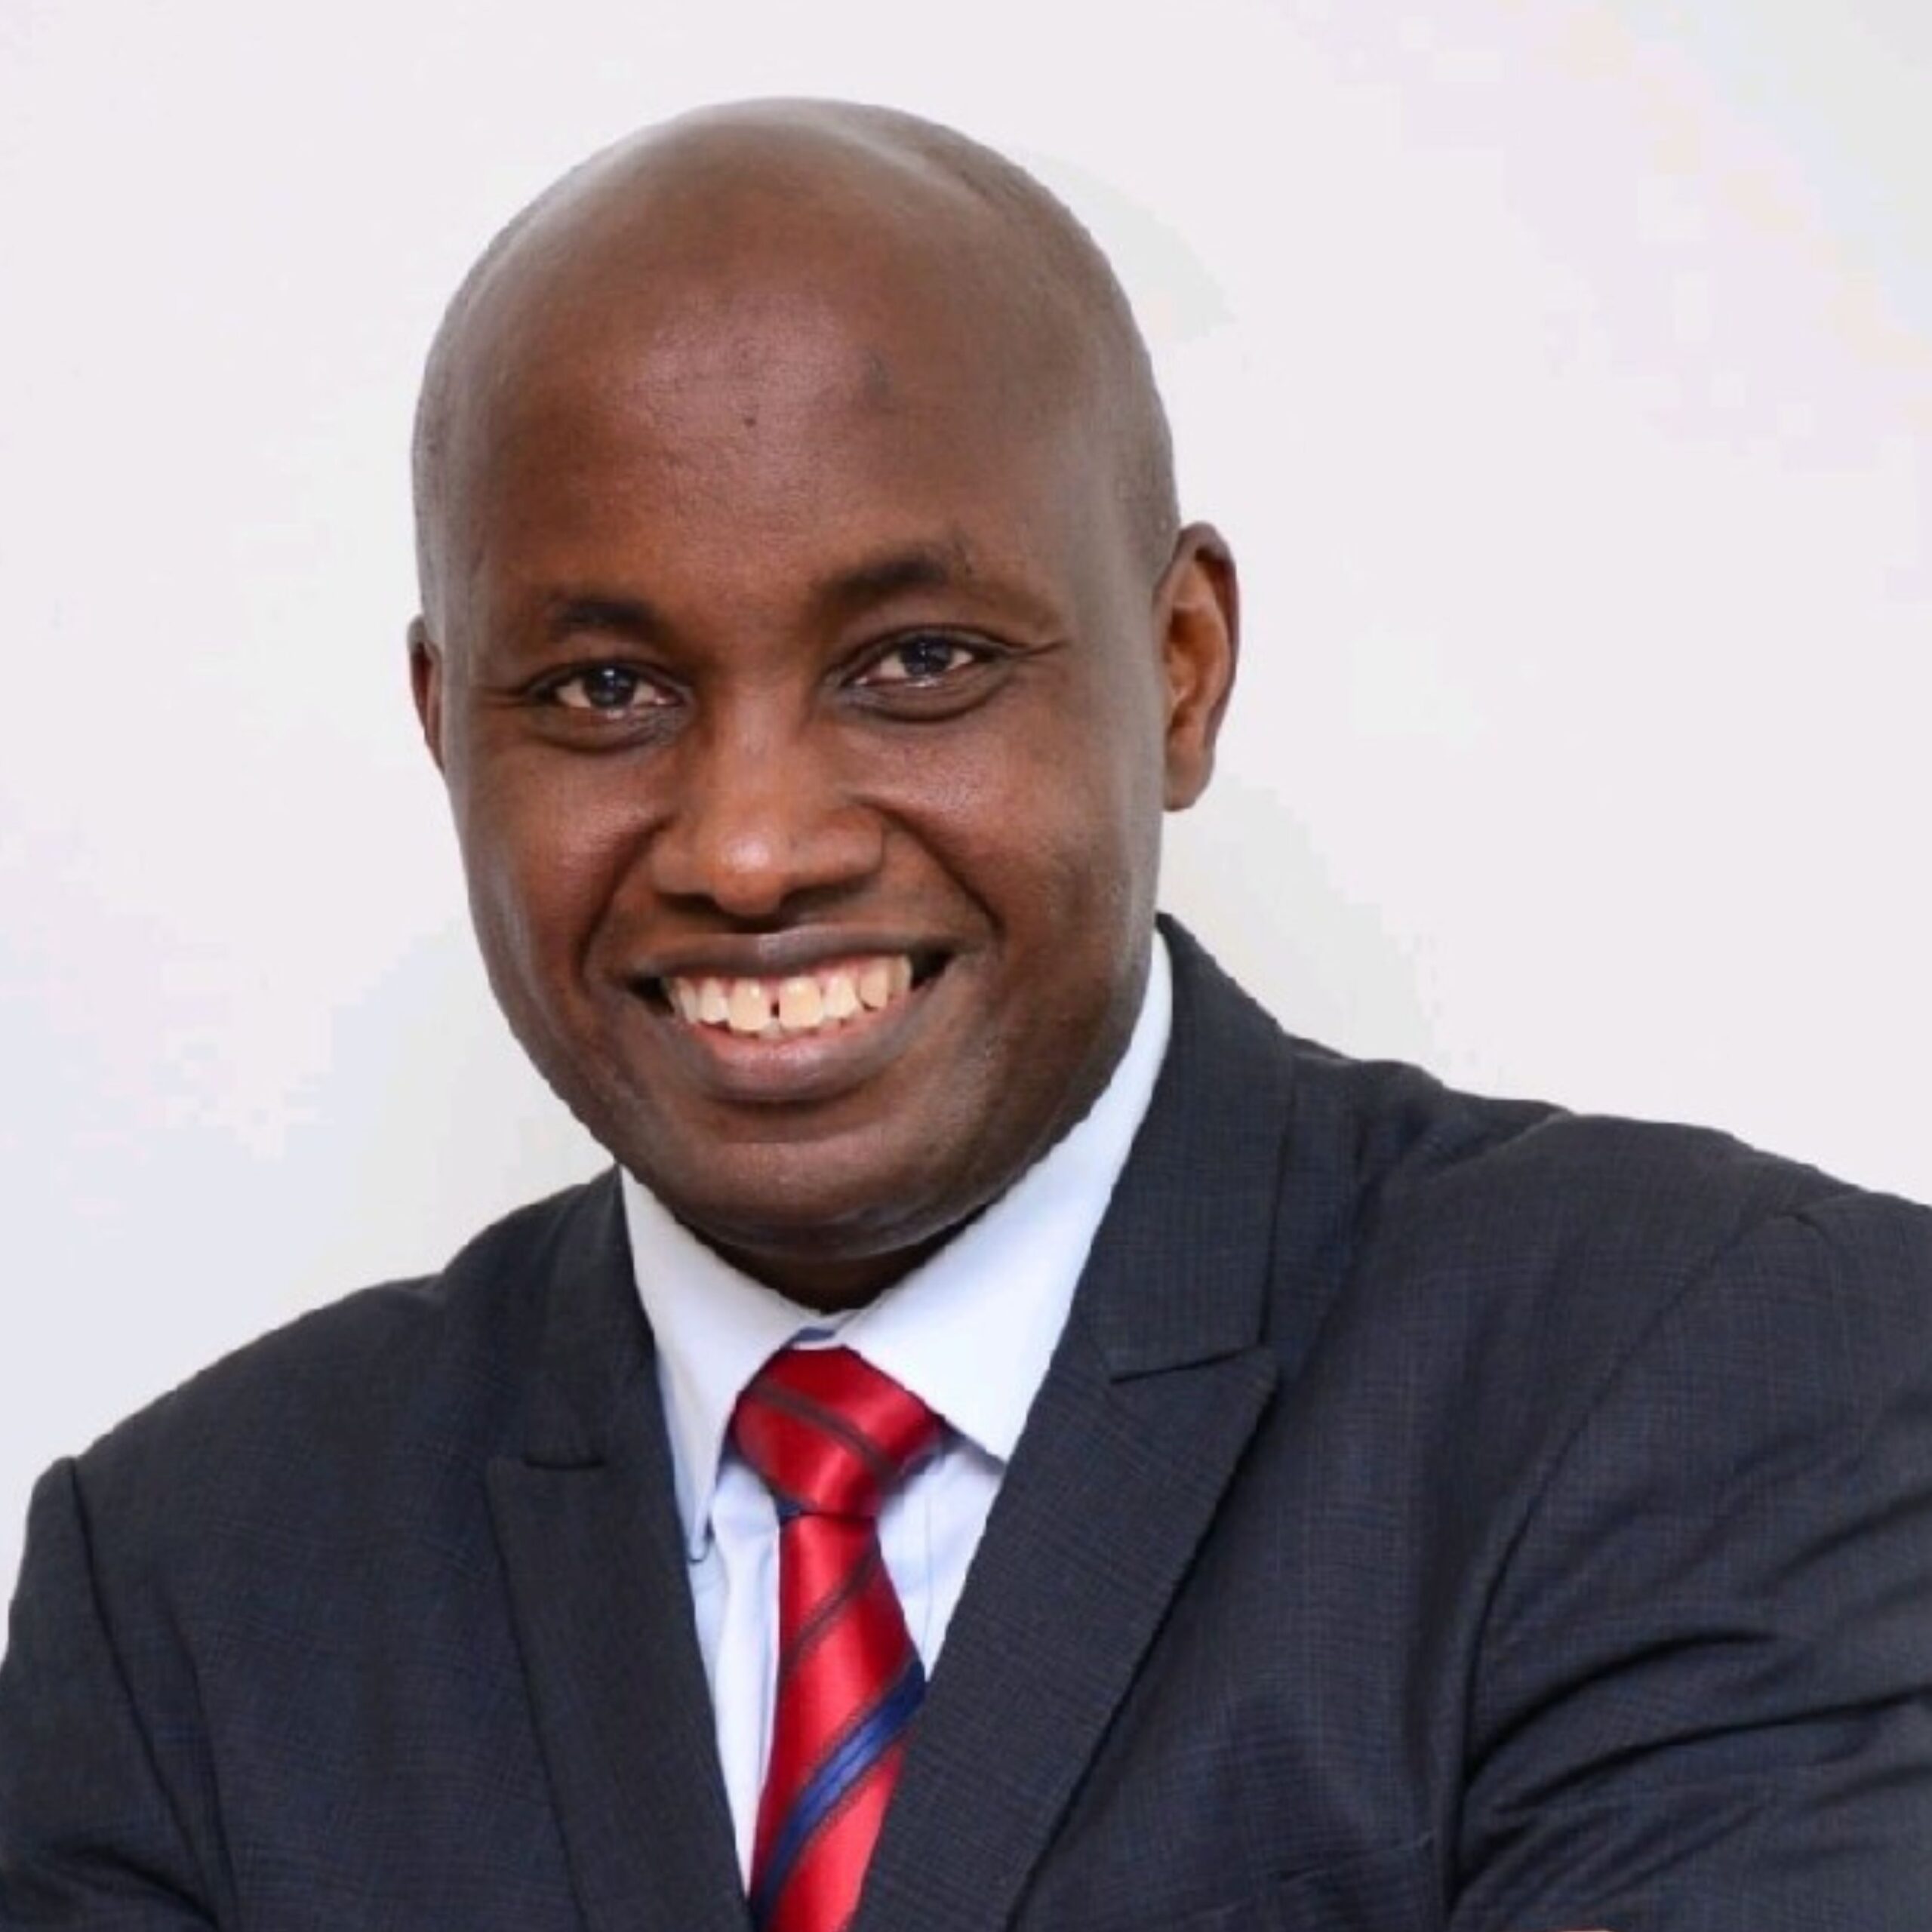 Head of Eastern Africa for the Association of Chartered Certified Accountants (ACCA) George Njari